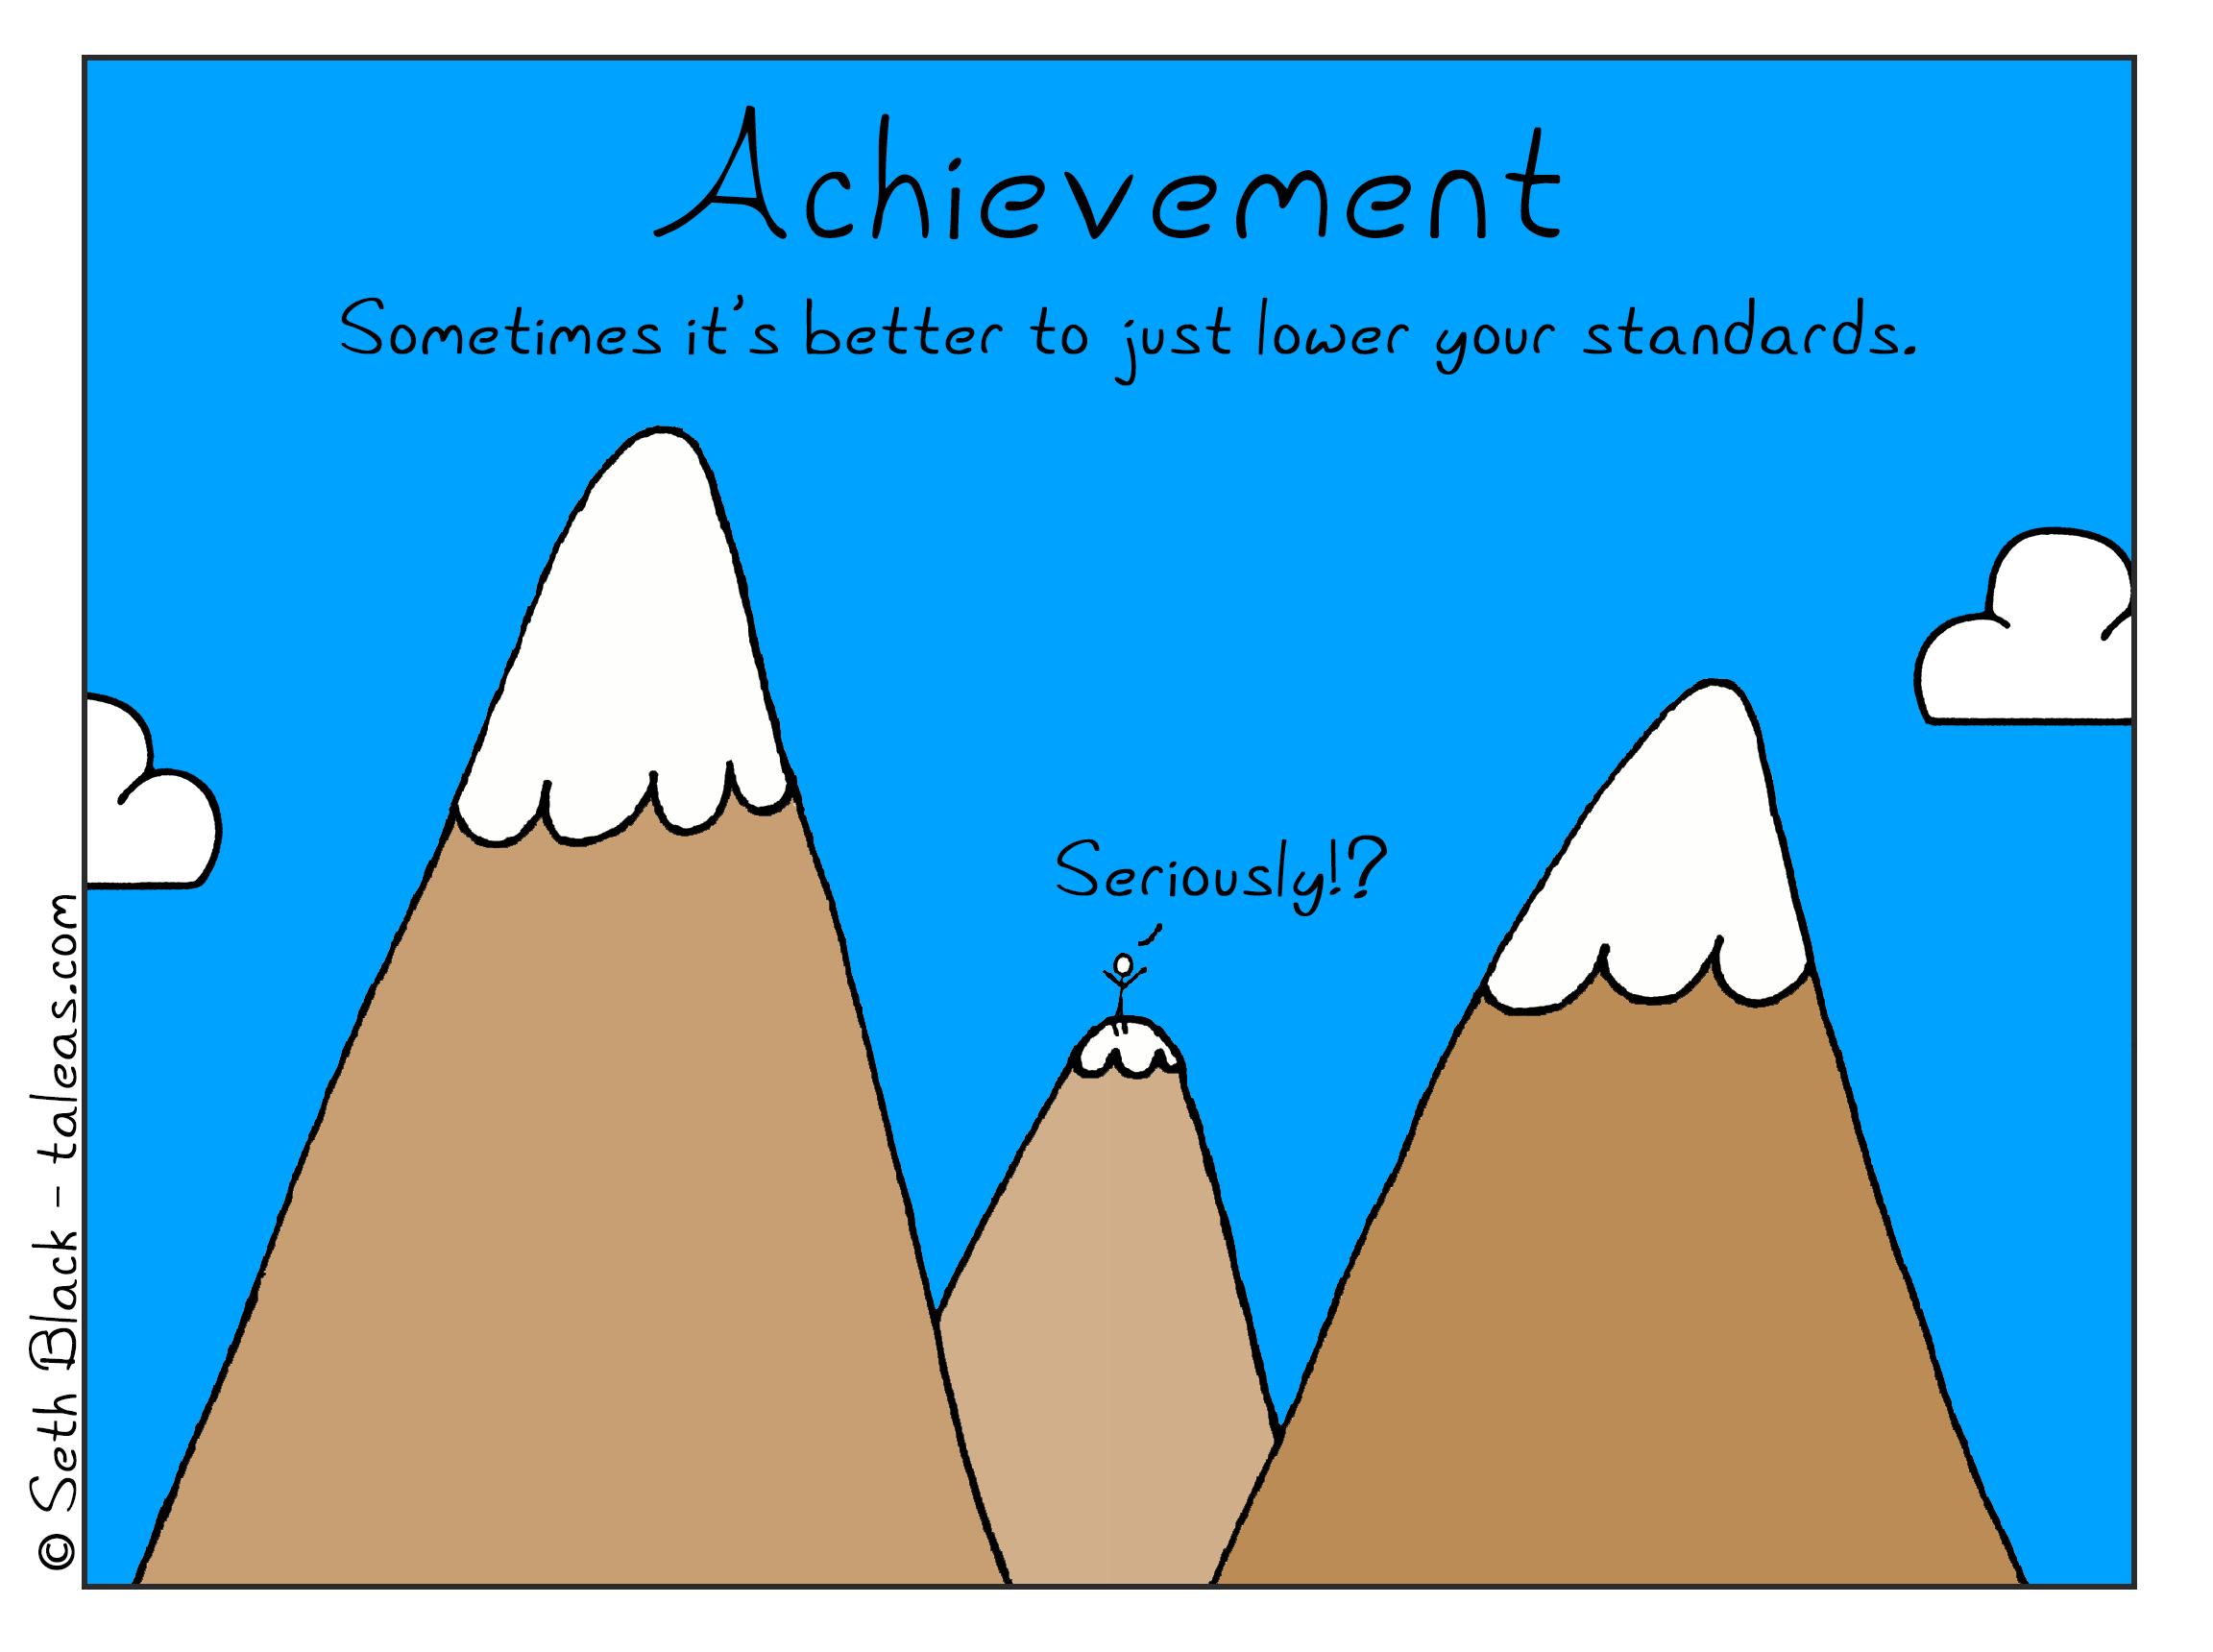 A poster with a stick figure standing on top of a very tall mountain. Two taller mountains overshadow the very tall mountain. The stick figure exclaims, "Seriously?!". "Achievement: Sometimes it's better to just lower your standards."